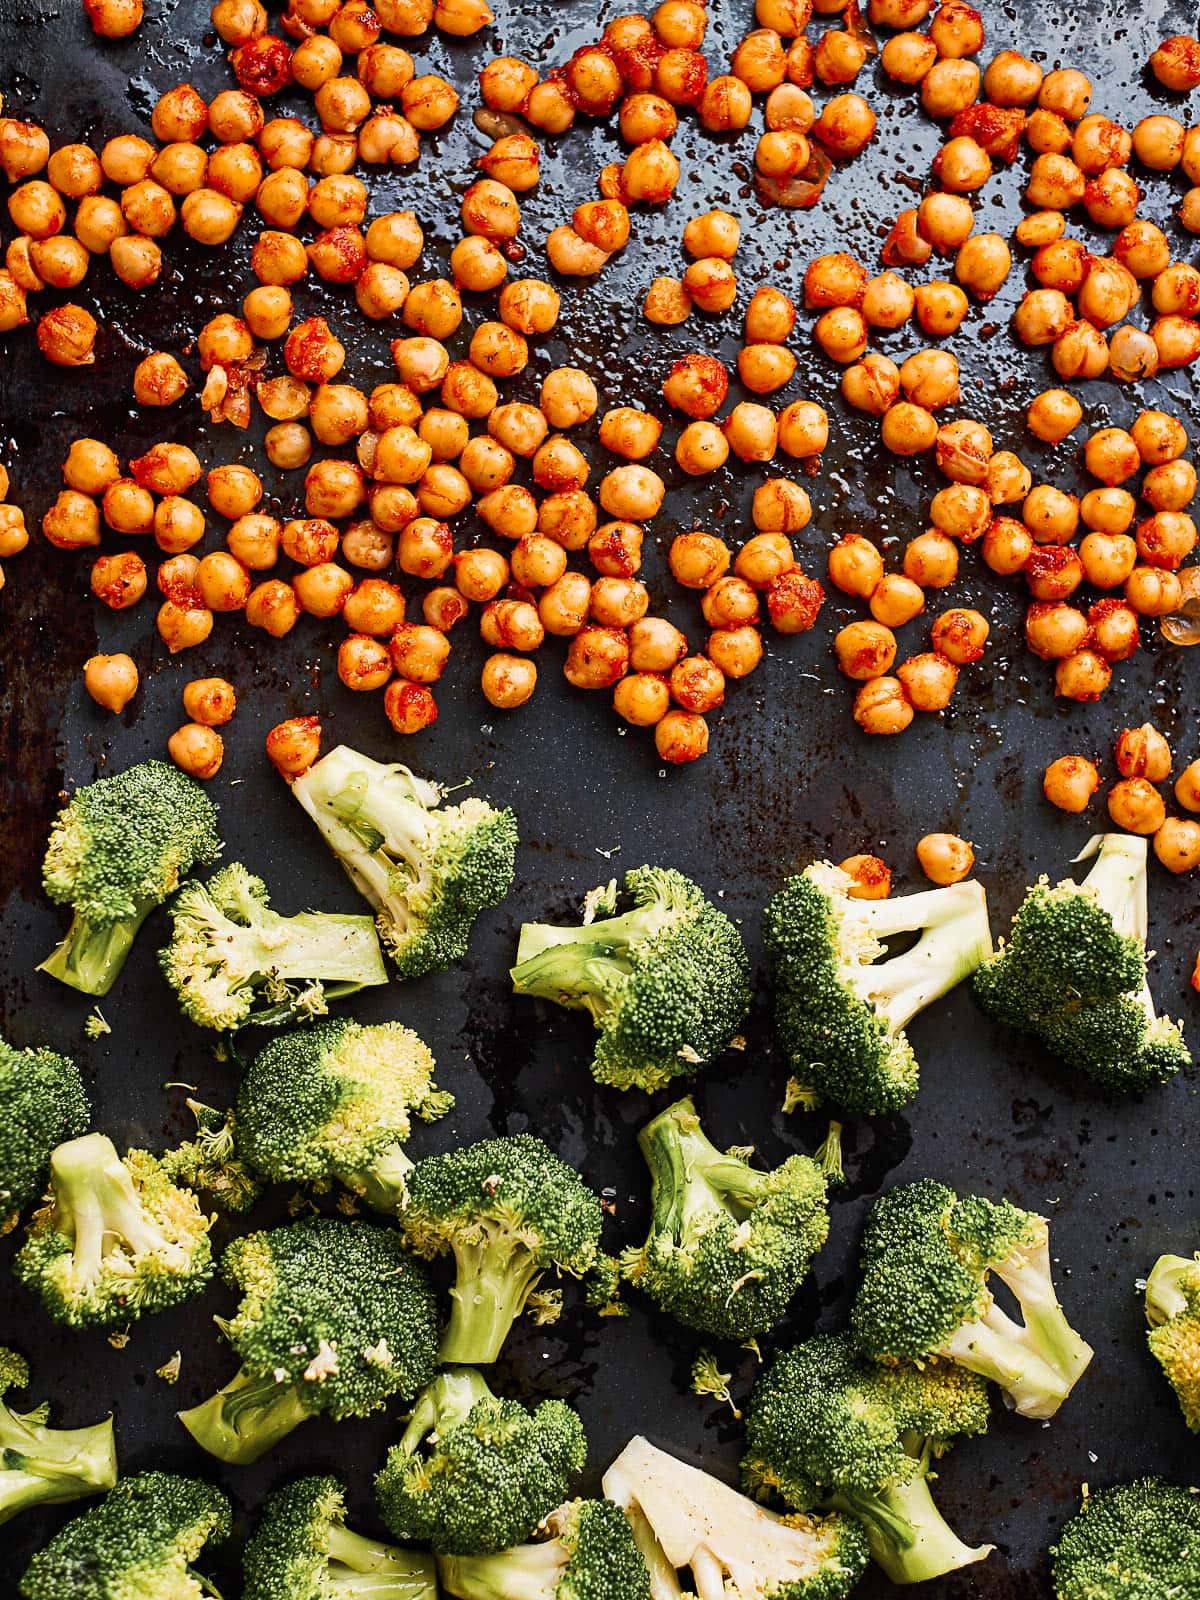 Broccoli and chickpeas on a baking sheet